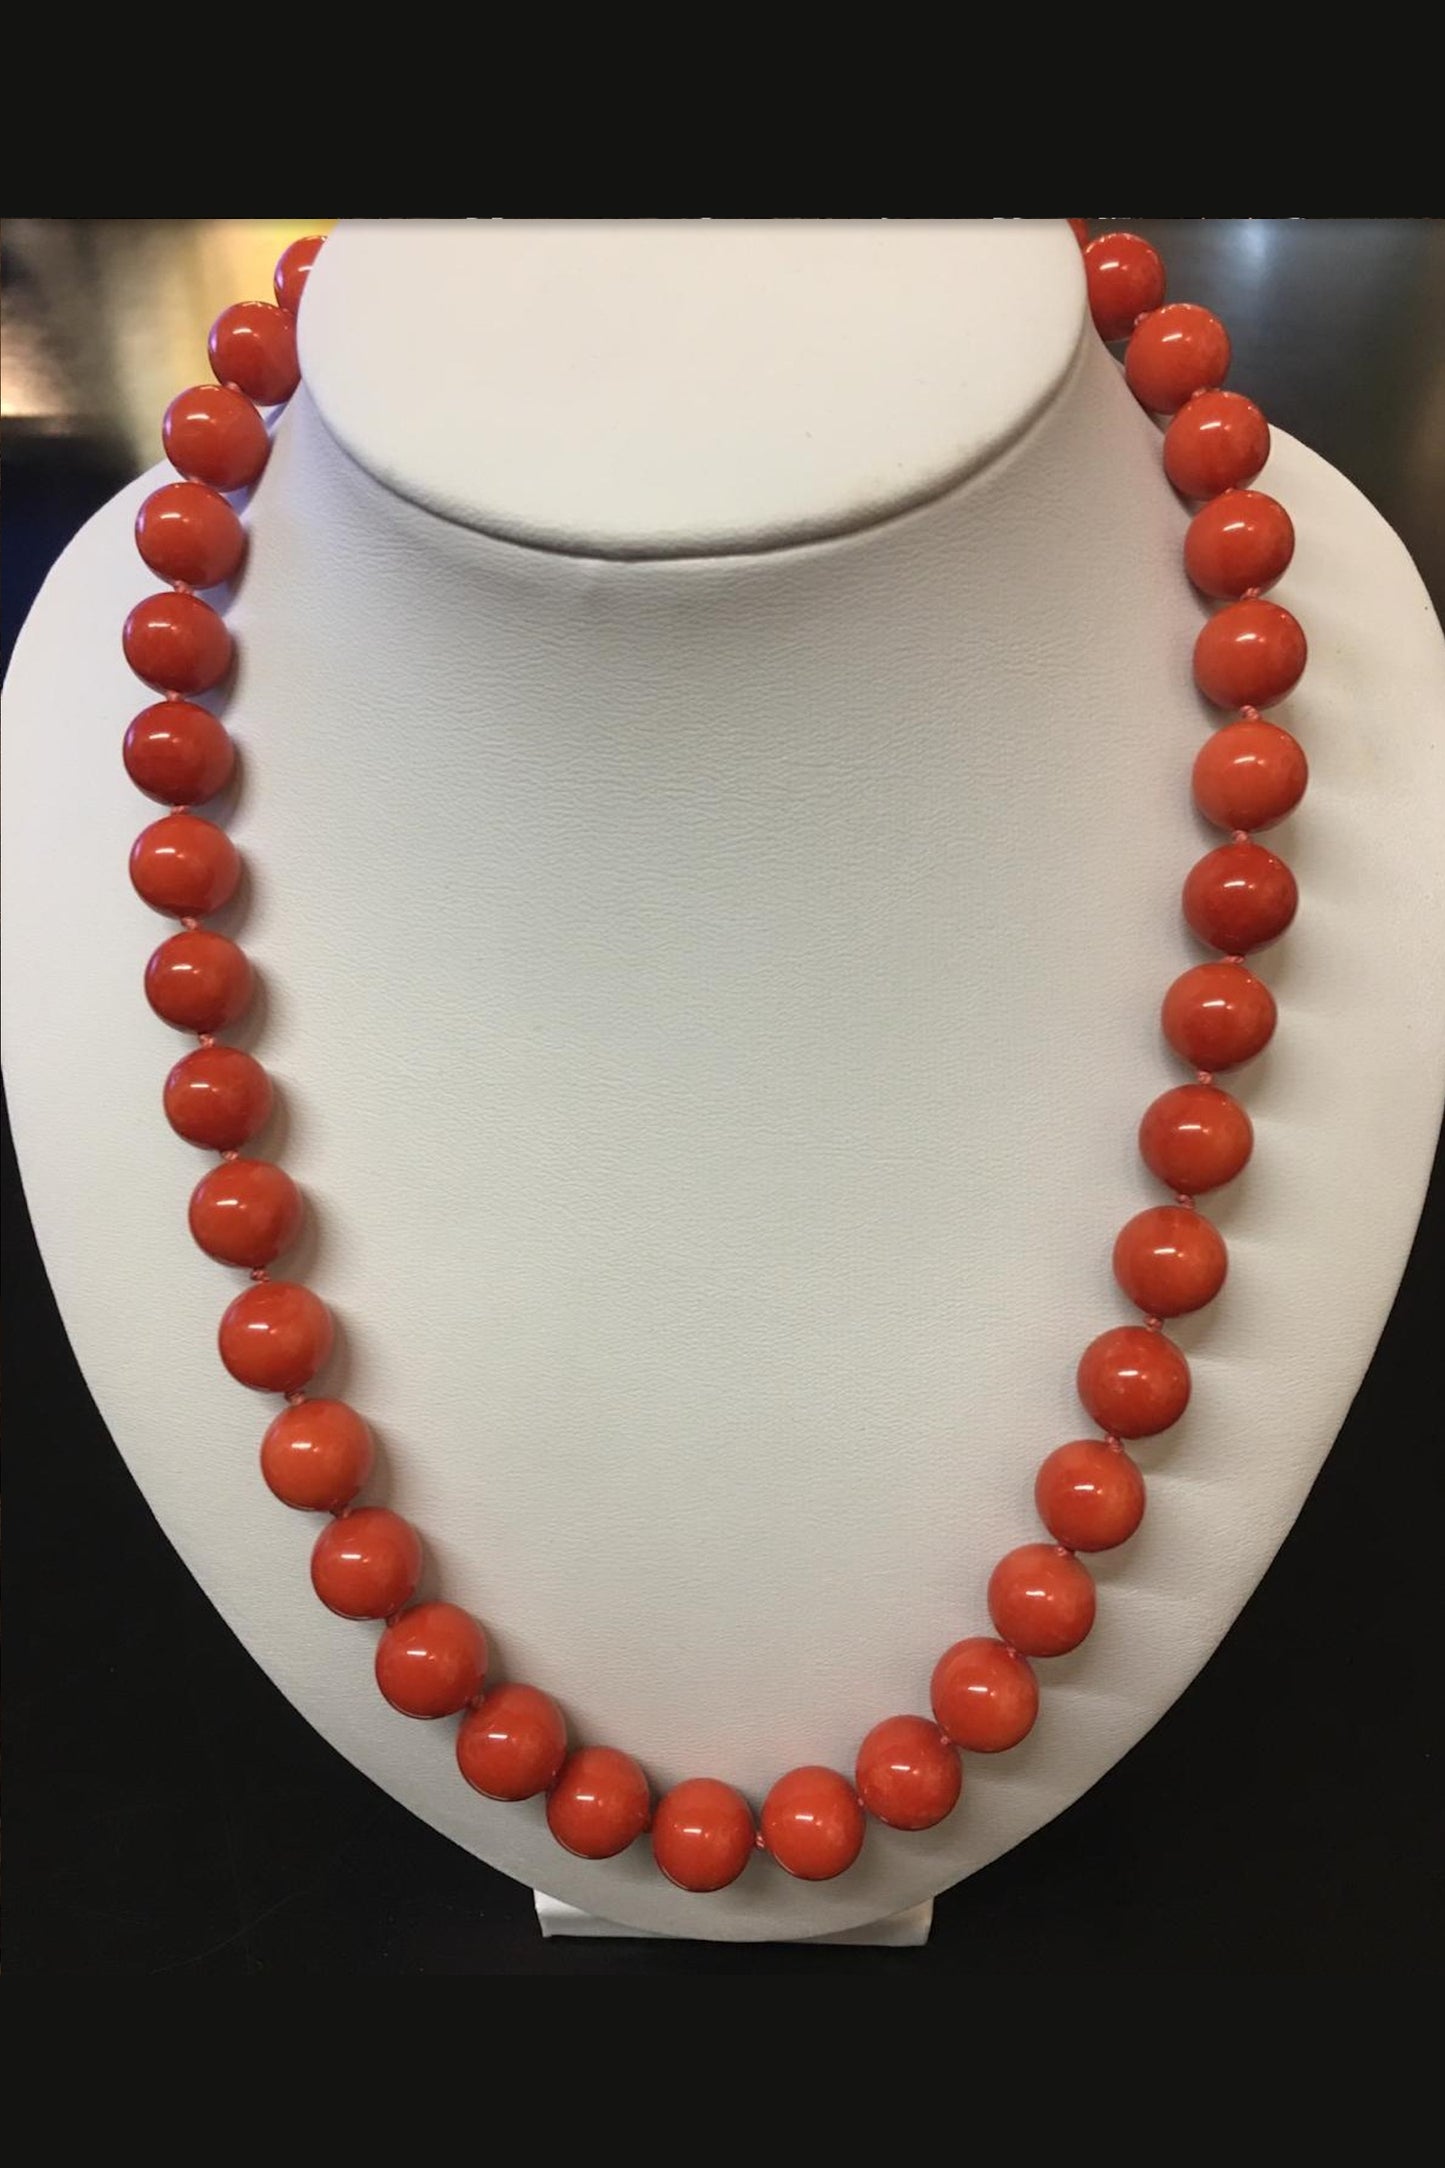 Precious Coral Necklace ⪼ Natural Red Color Coral Necklace with Gold Clasp